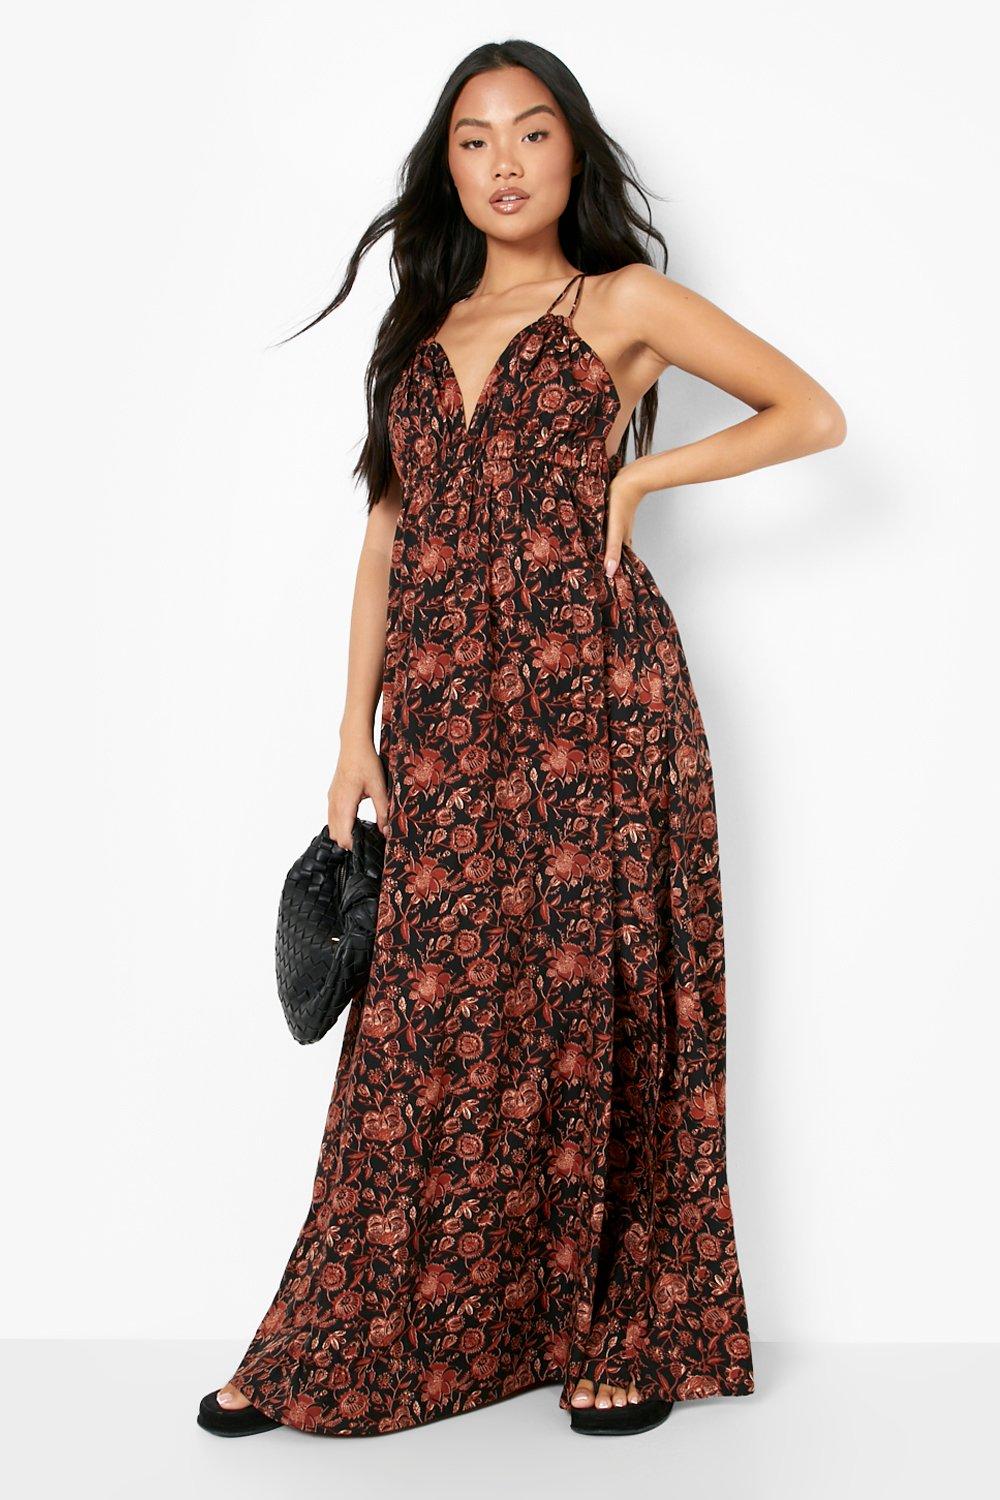 Boohoo Petite Paisley Strappy Ruched Maxi Dress, Black